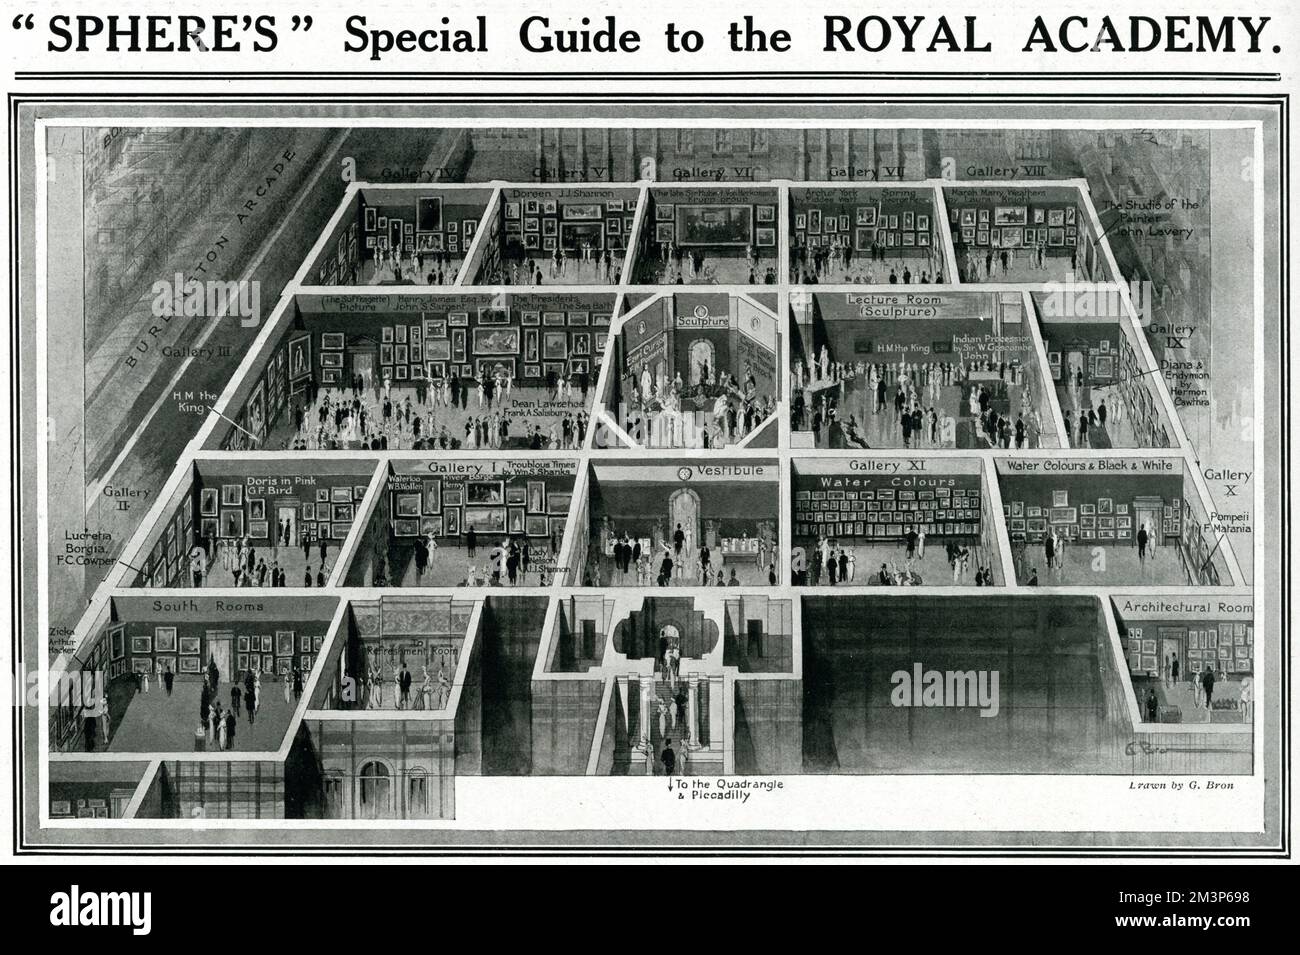 The Sphere's special guide to the Royal Academy summer exhibition, with a three-dimensional floorplan of the various rooms. Stock Photo